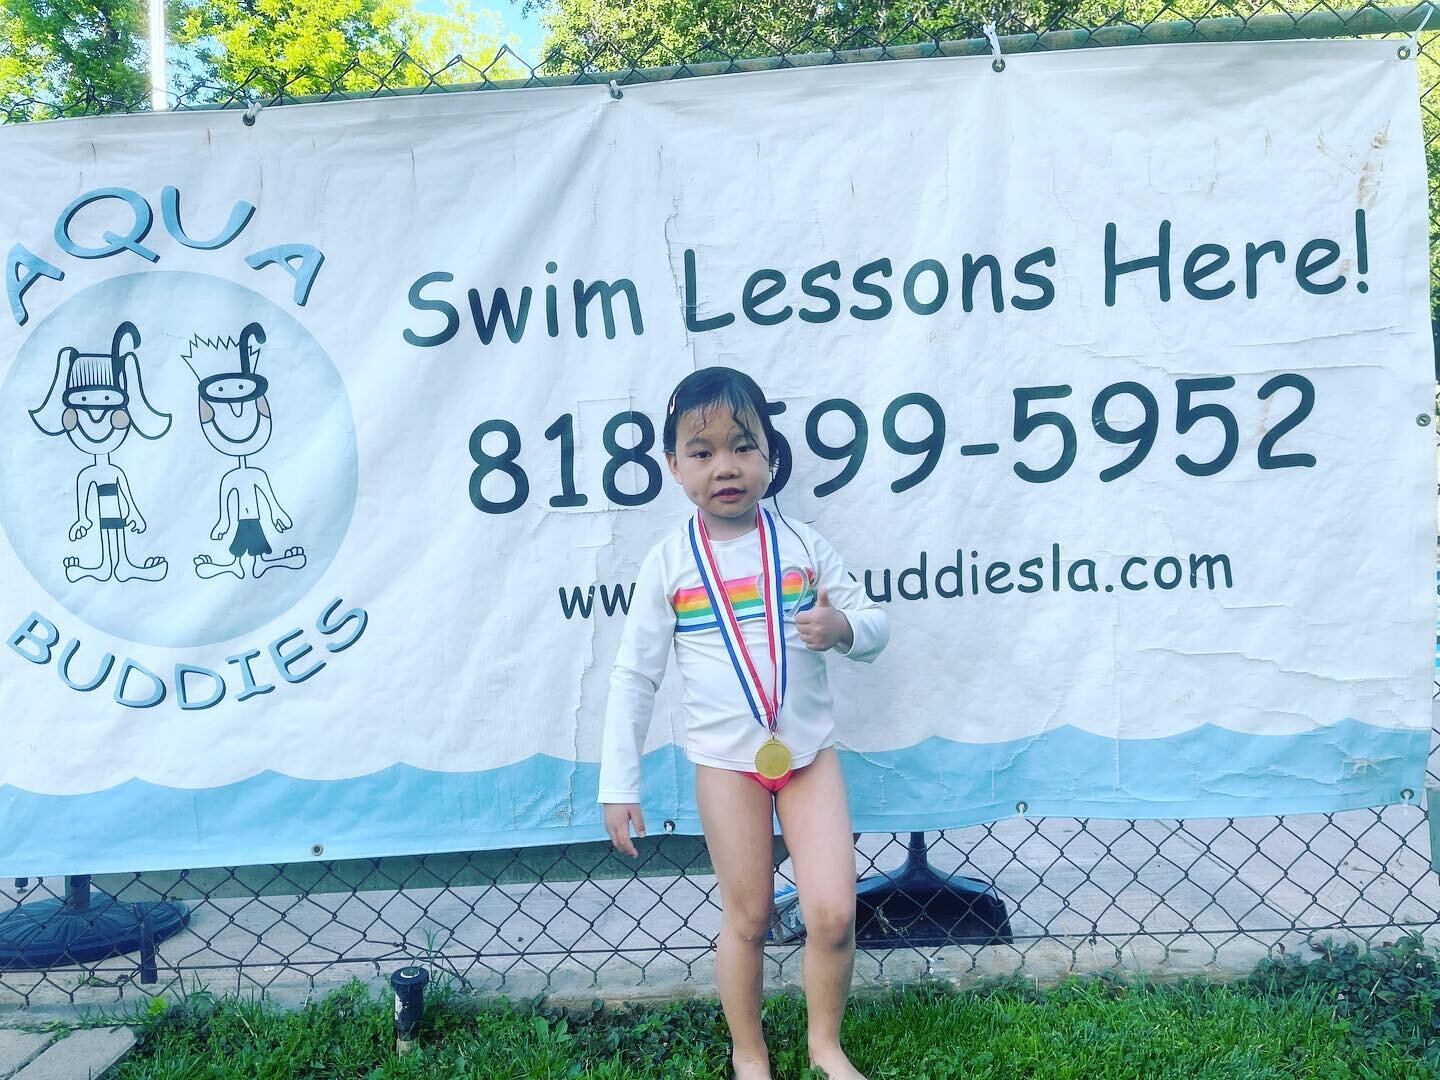 Aqua Buddies recognizes our swimmers when they meet their goals.  This little cutie swimmer earned the first medal of the 2022 season!! 🏅 Way to go Charlotte! 💙  #aquabuddiesla #swimmer #watersafe #keepswimming #gogogo #swimlessons